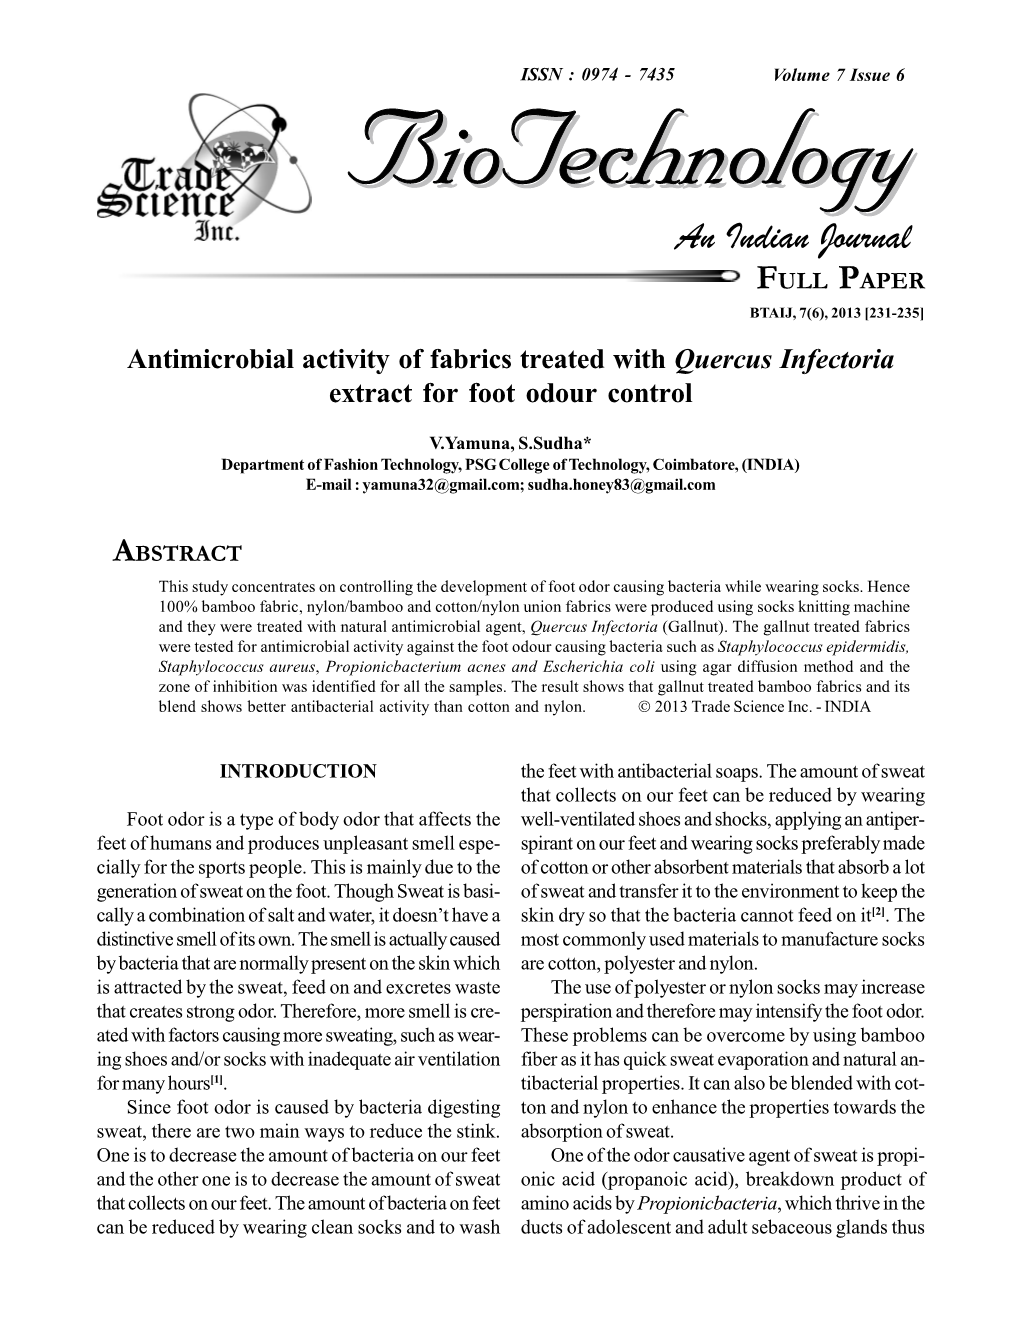 Antimicrobial Activity of Fabrics Treated with Quercus Infectoria Extract for Foot Odour Control